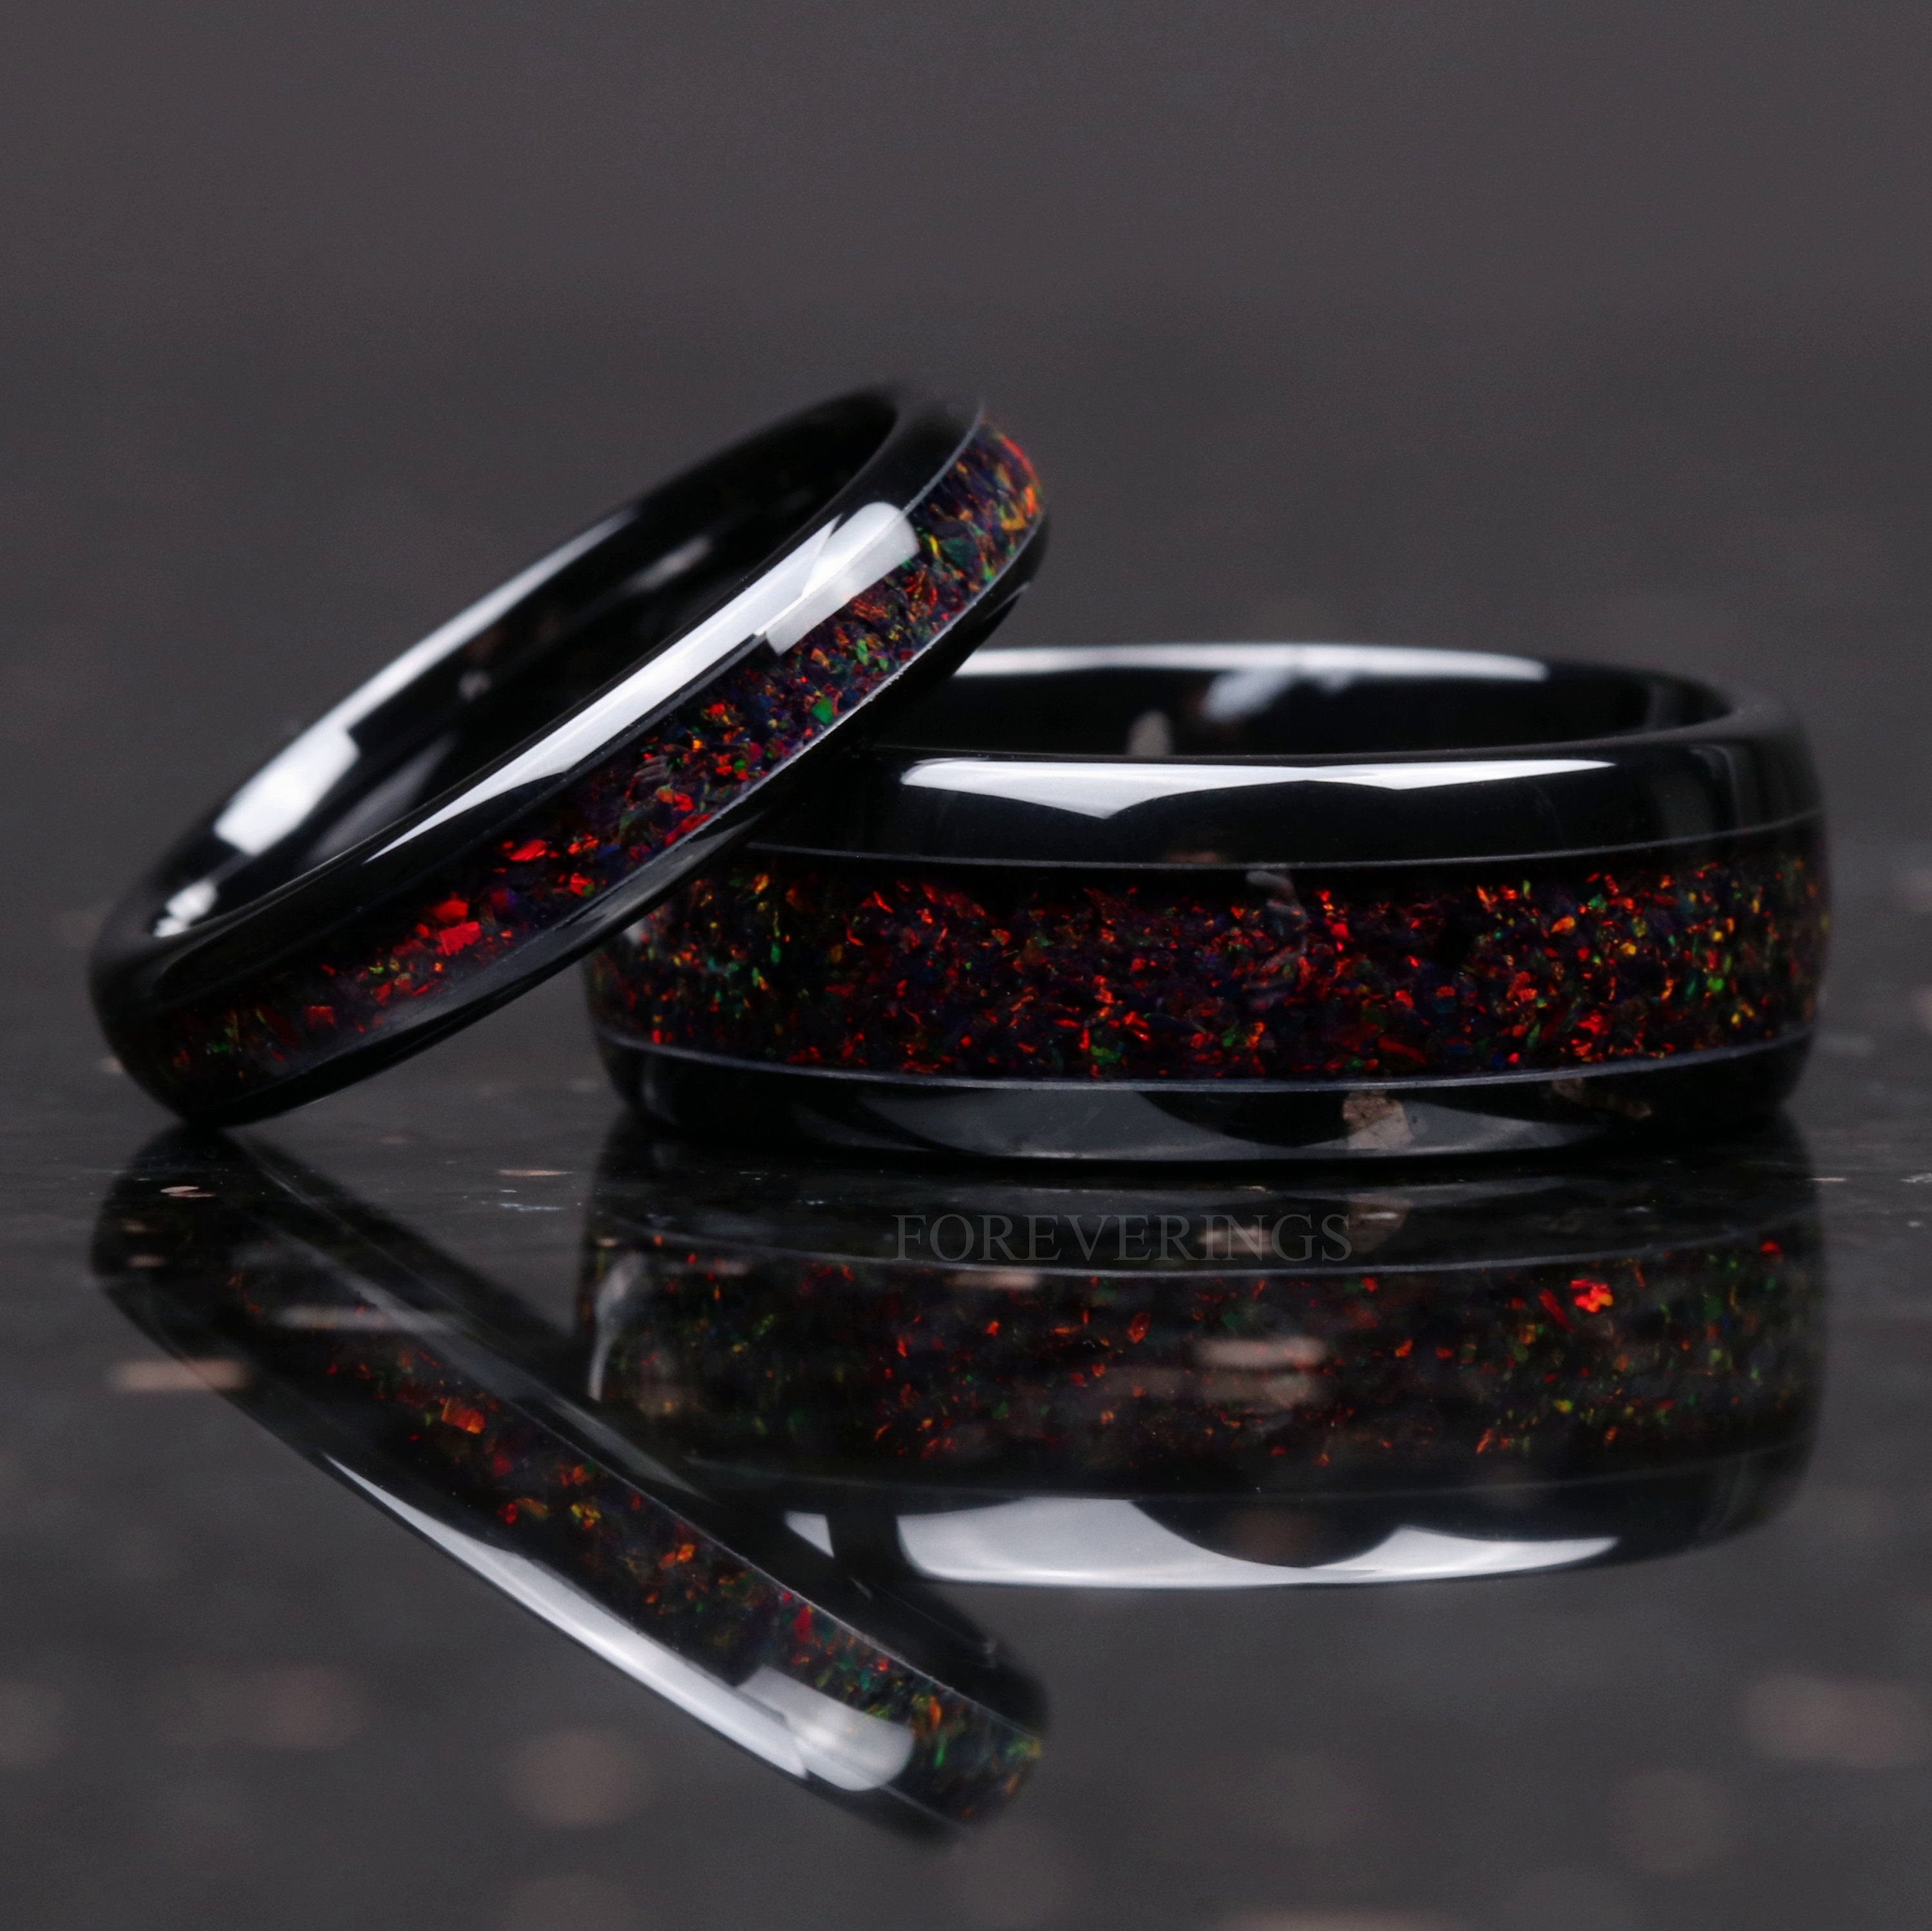 His & Hers Wedding Ring Set- Black Ceramic Ring Set with Green Fire Opal & Glowstone Inlay - 8mm & 6mm Rings - Sizes 5-13 - Orth Custom Rings